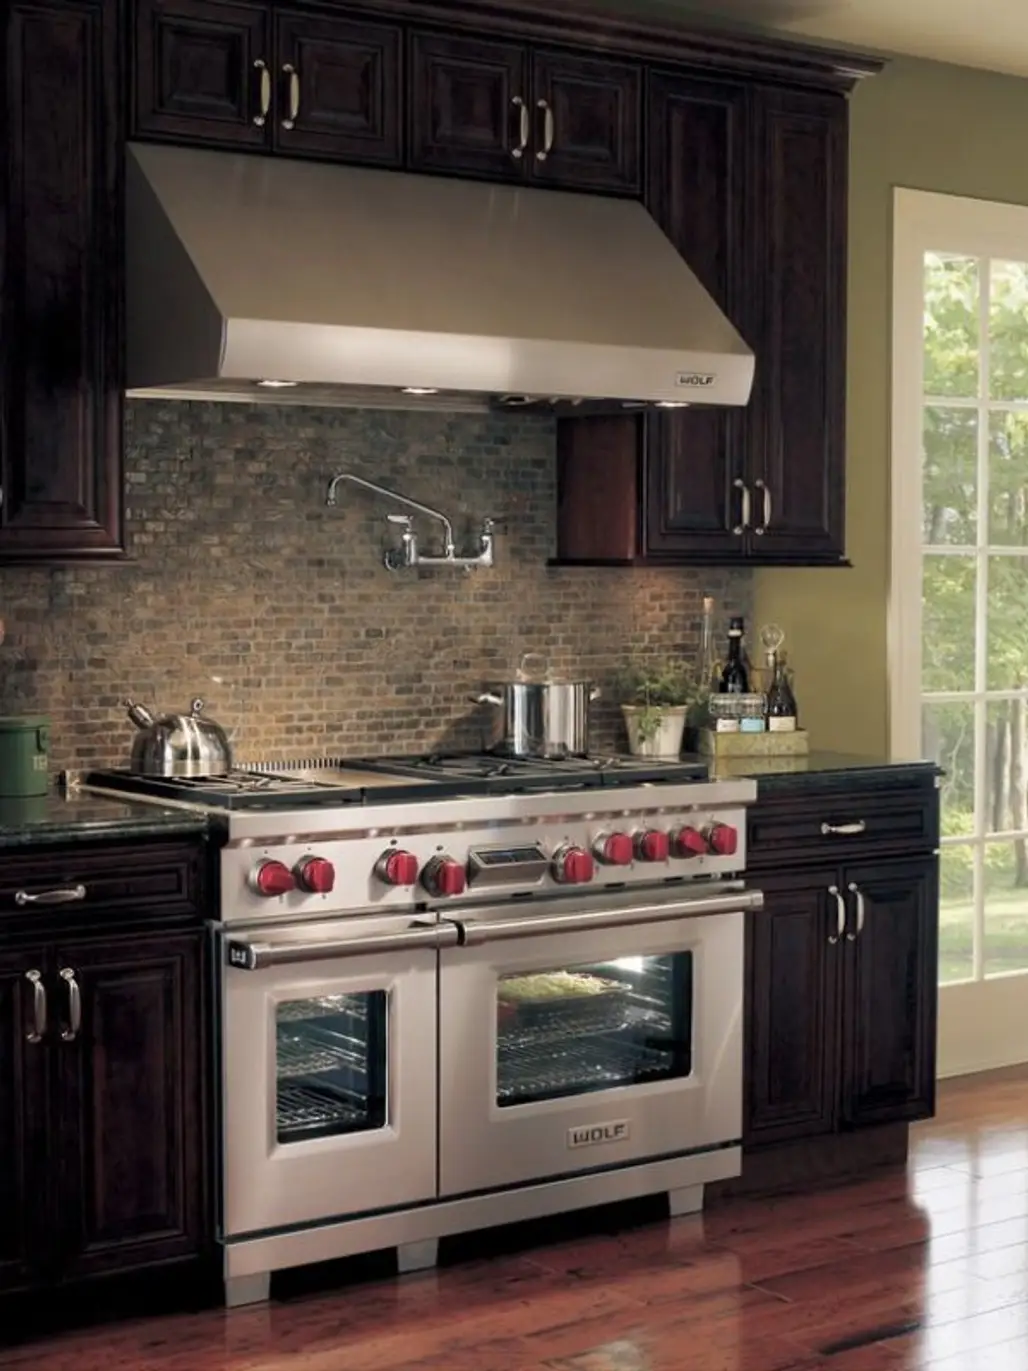 Dark Cabinets with an Industrial Oven